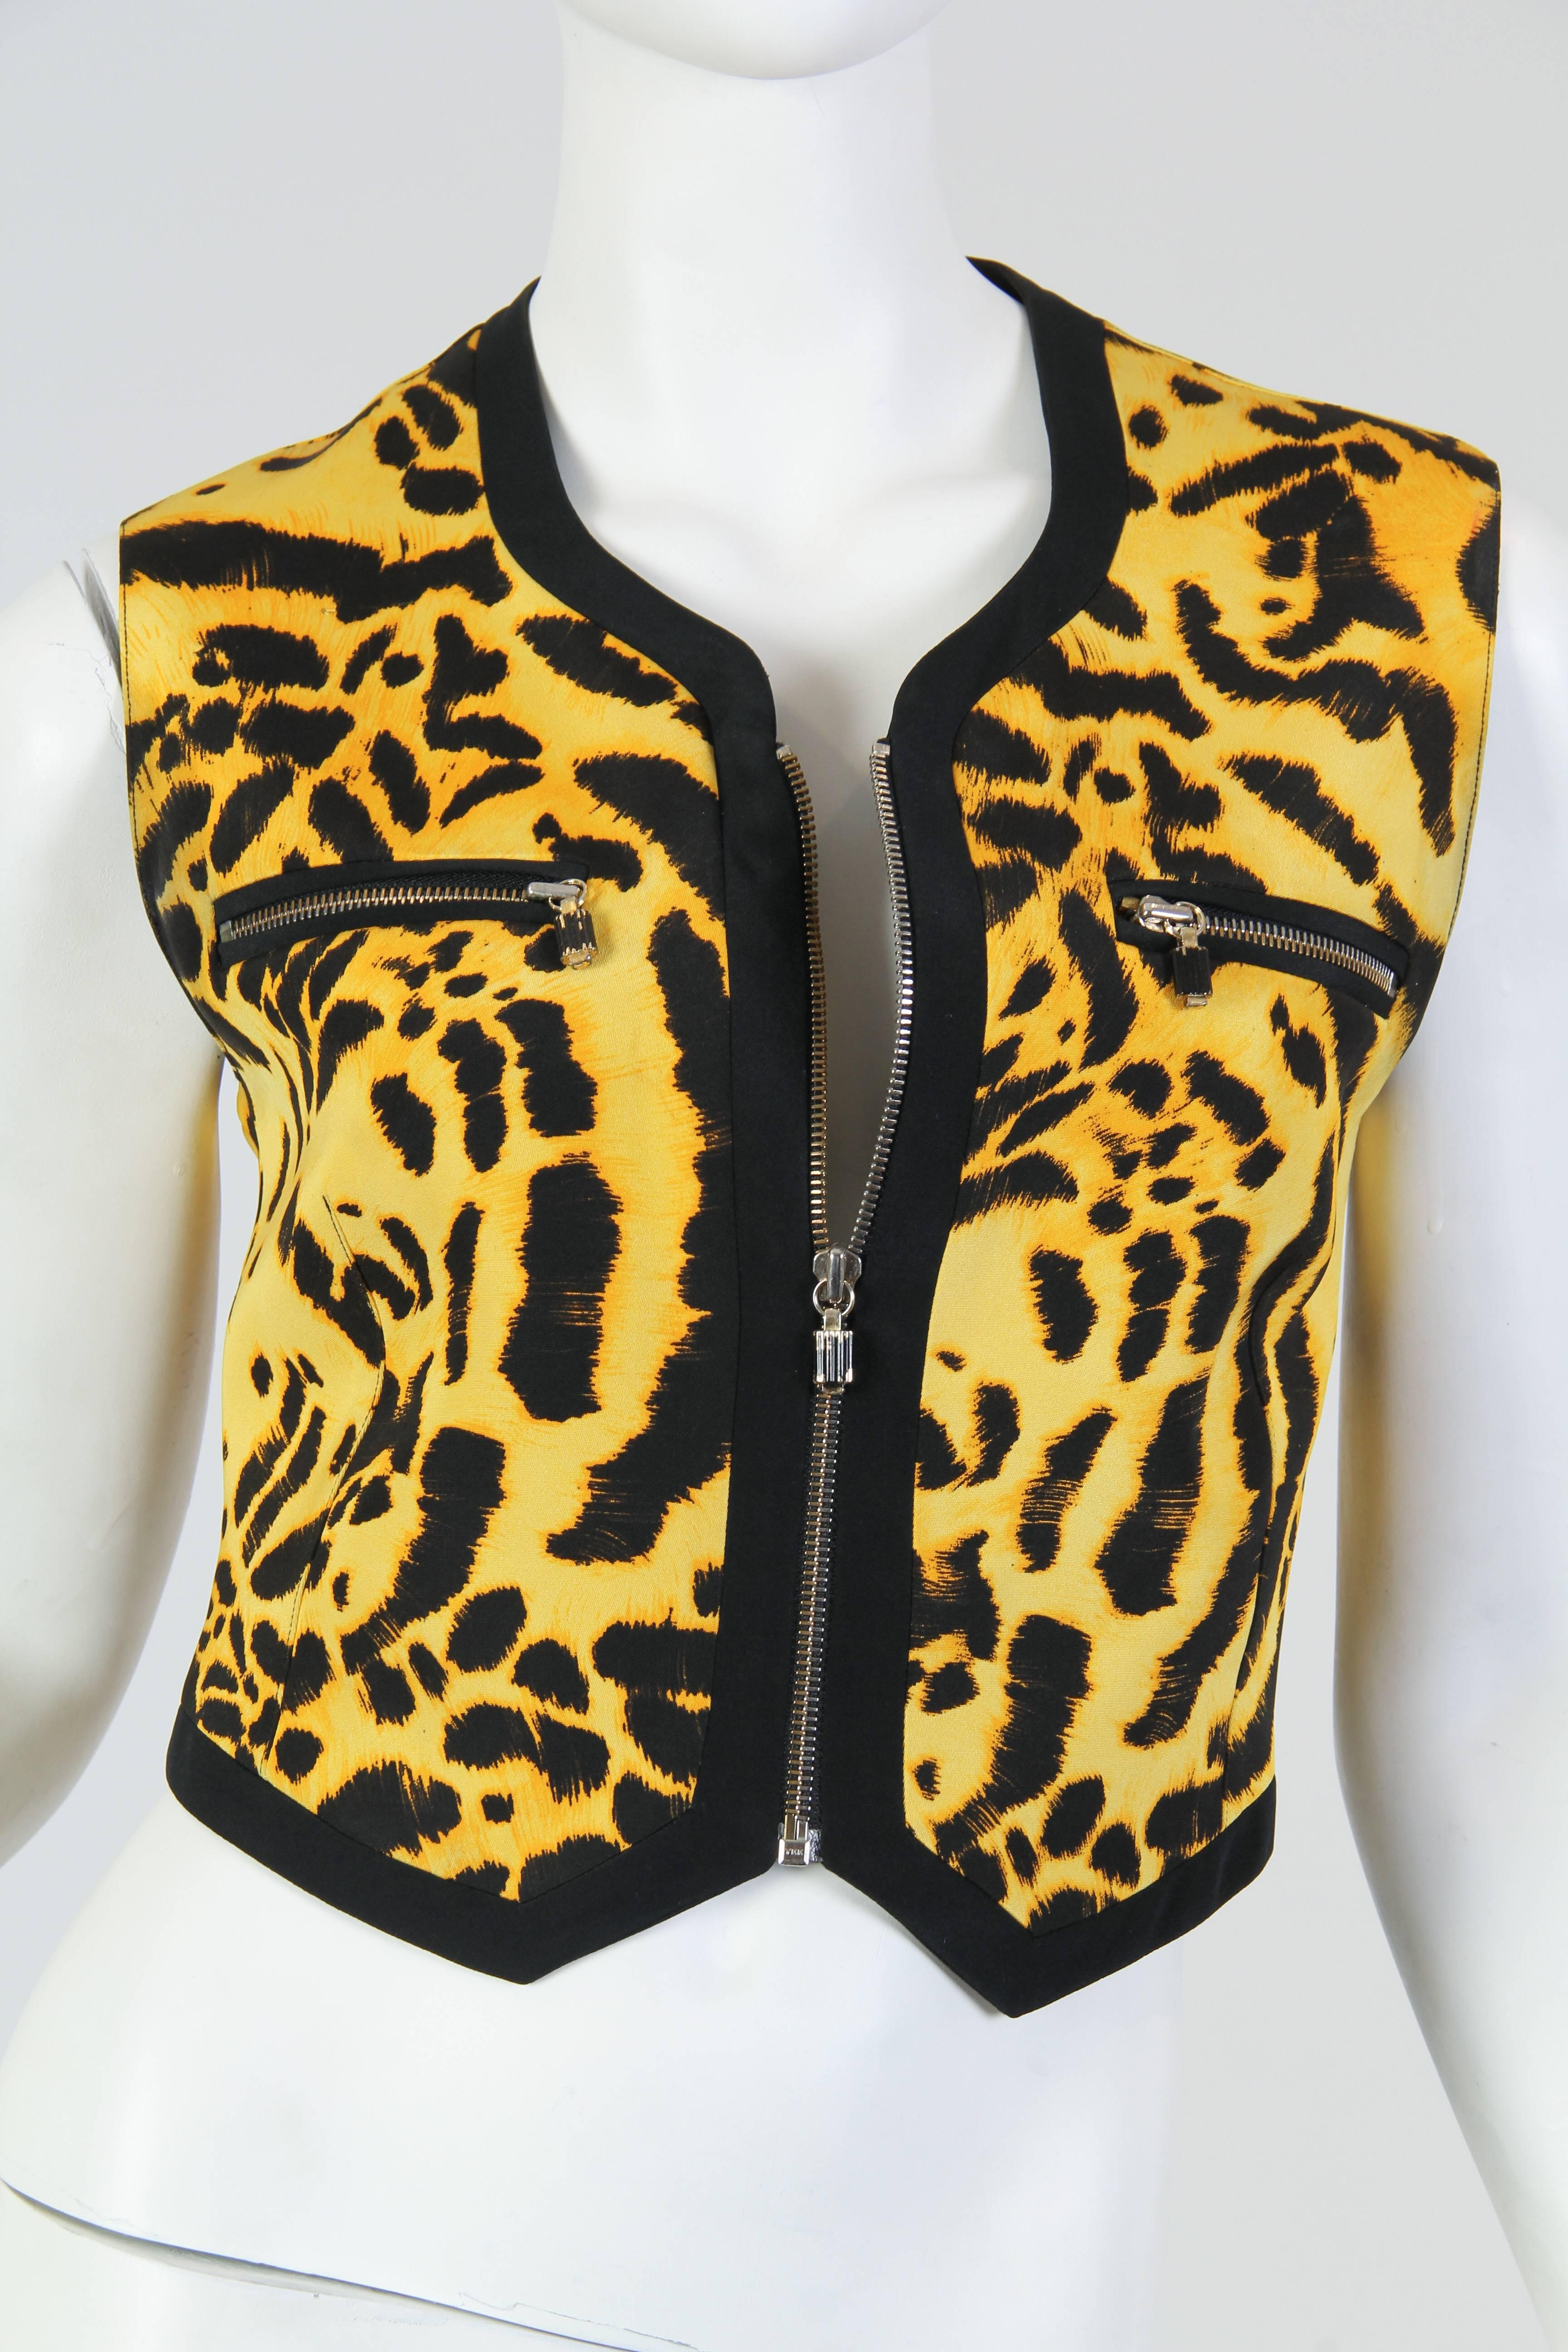 Gianni Versace Couture Leopard Zipper Silk Top In Excellent Condition For Sale In New York, NY